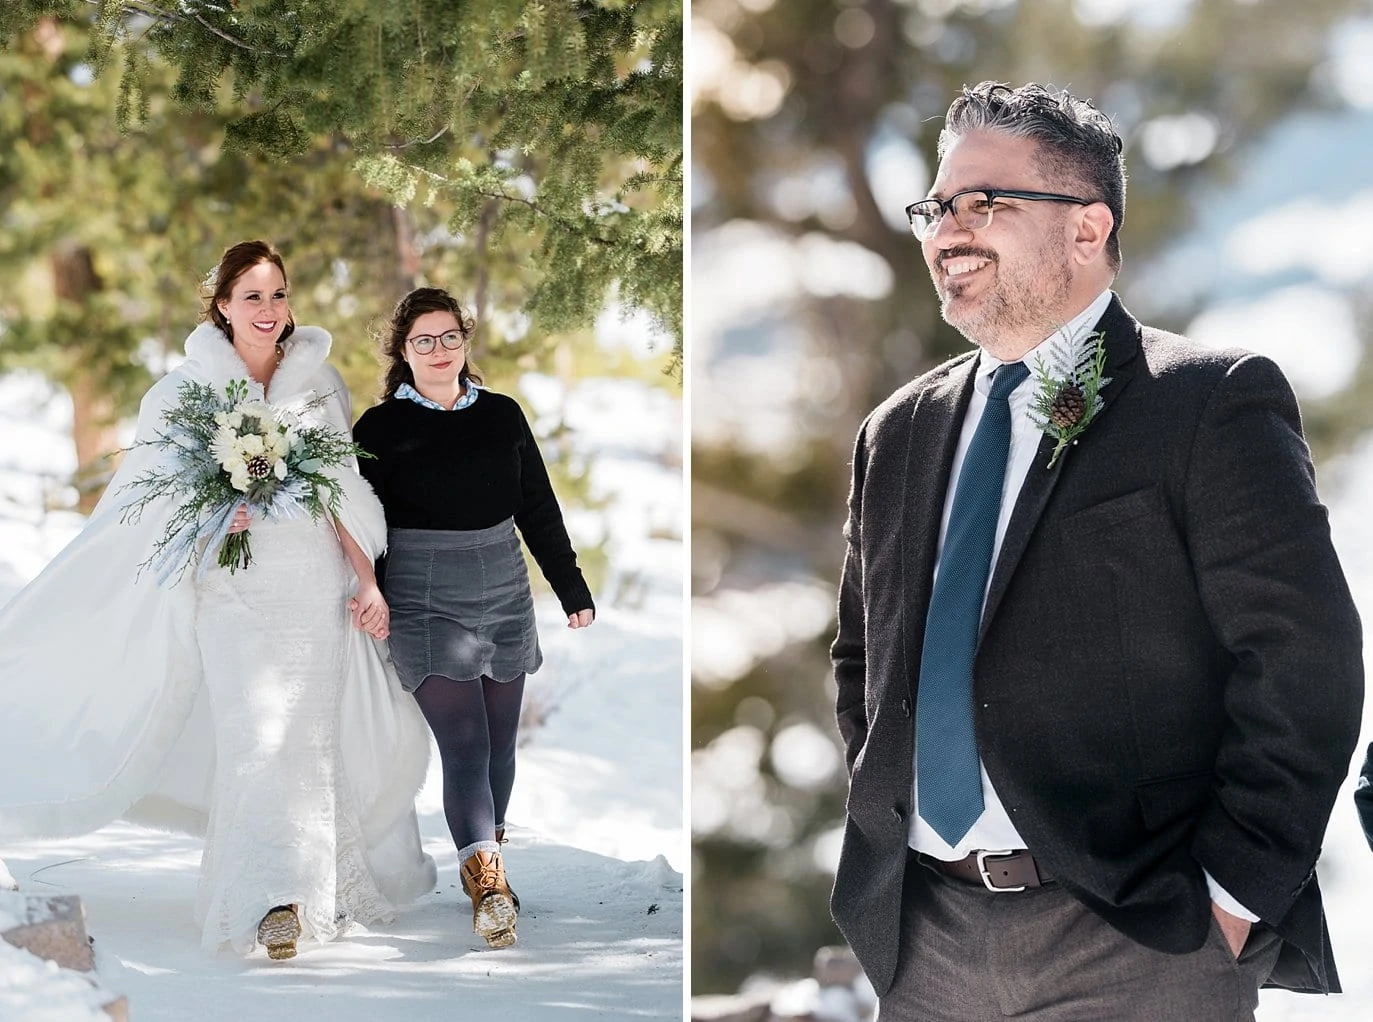 Bride and daughter walk to groom at Sapphire Point Elopement by Vail wedding photographer Jennie Crate Photographer